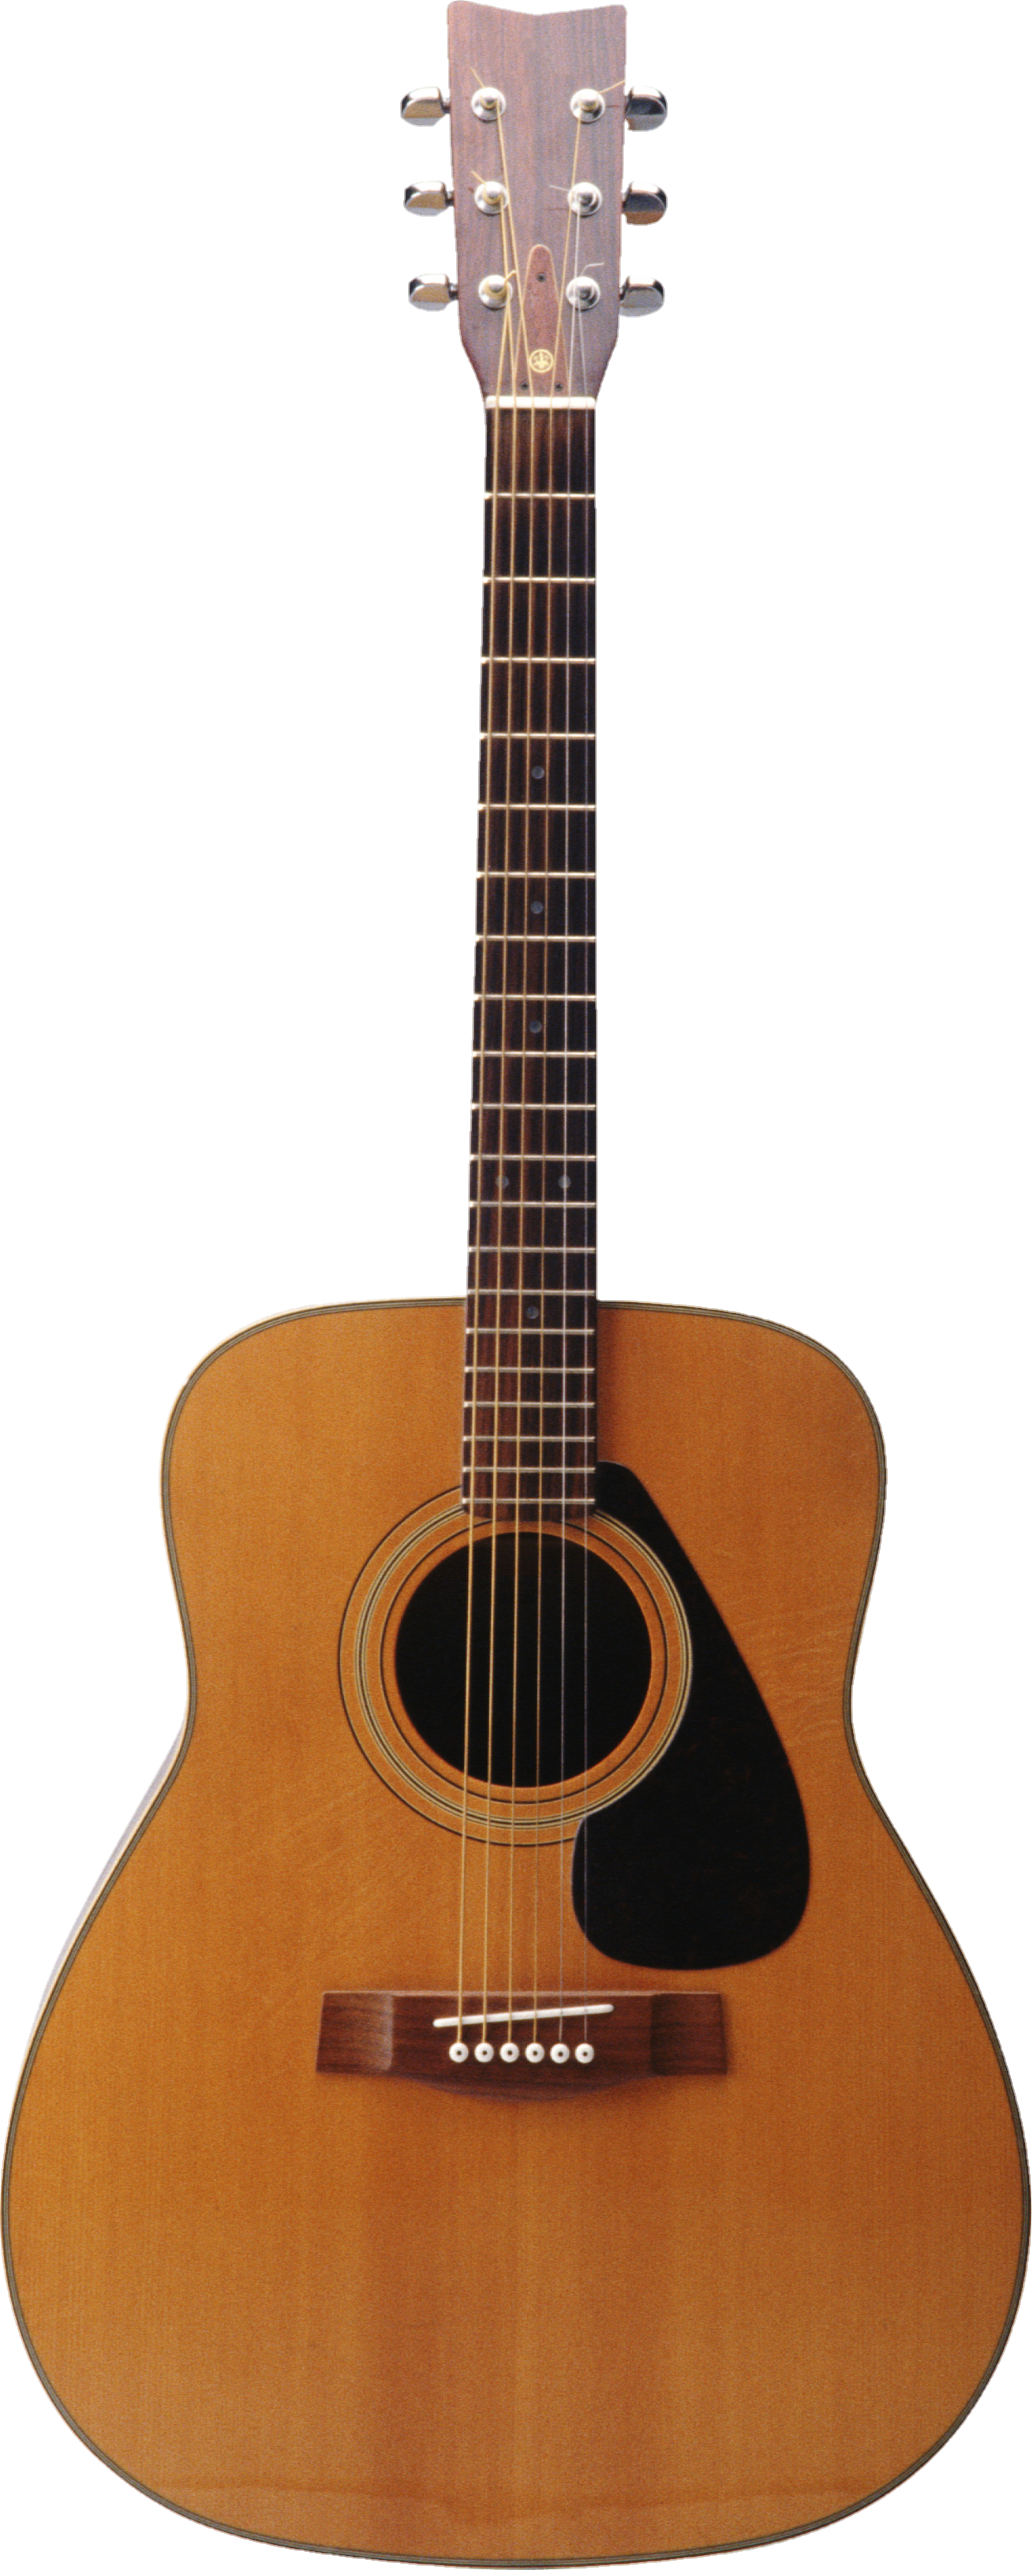 guitar-png-image-from-pngfre-8